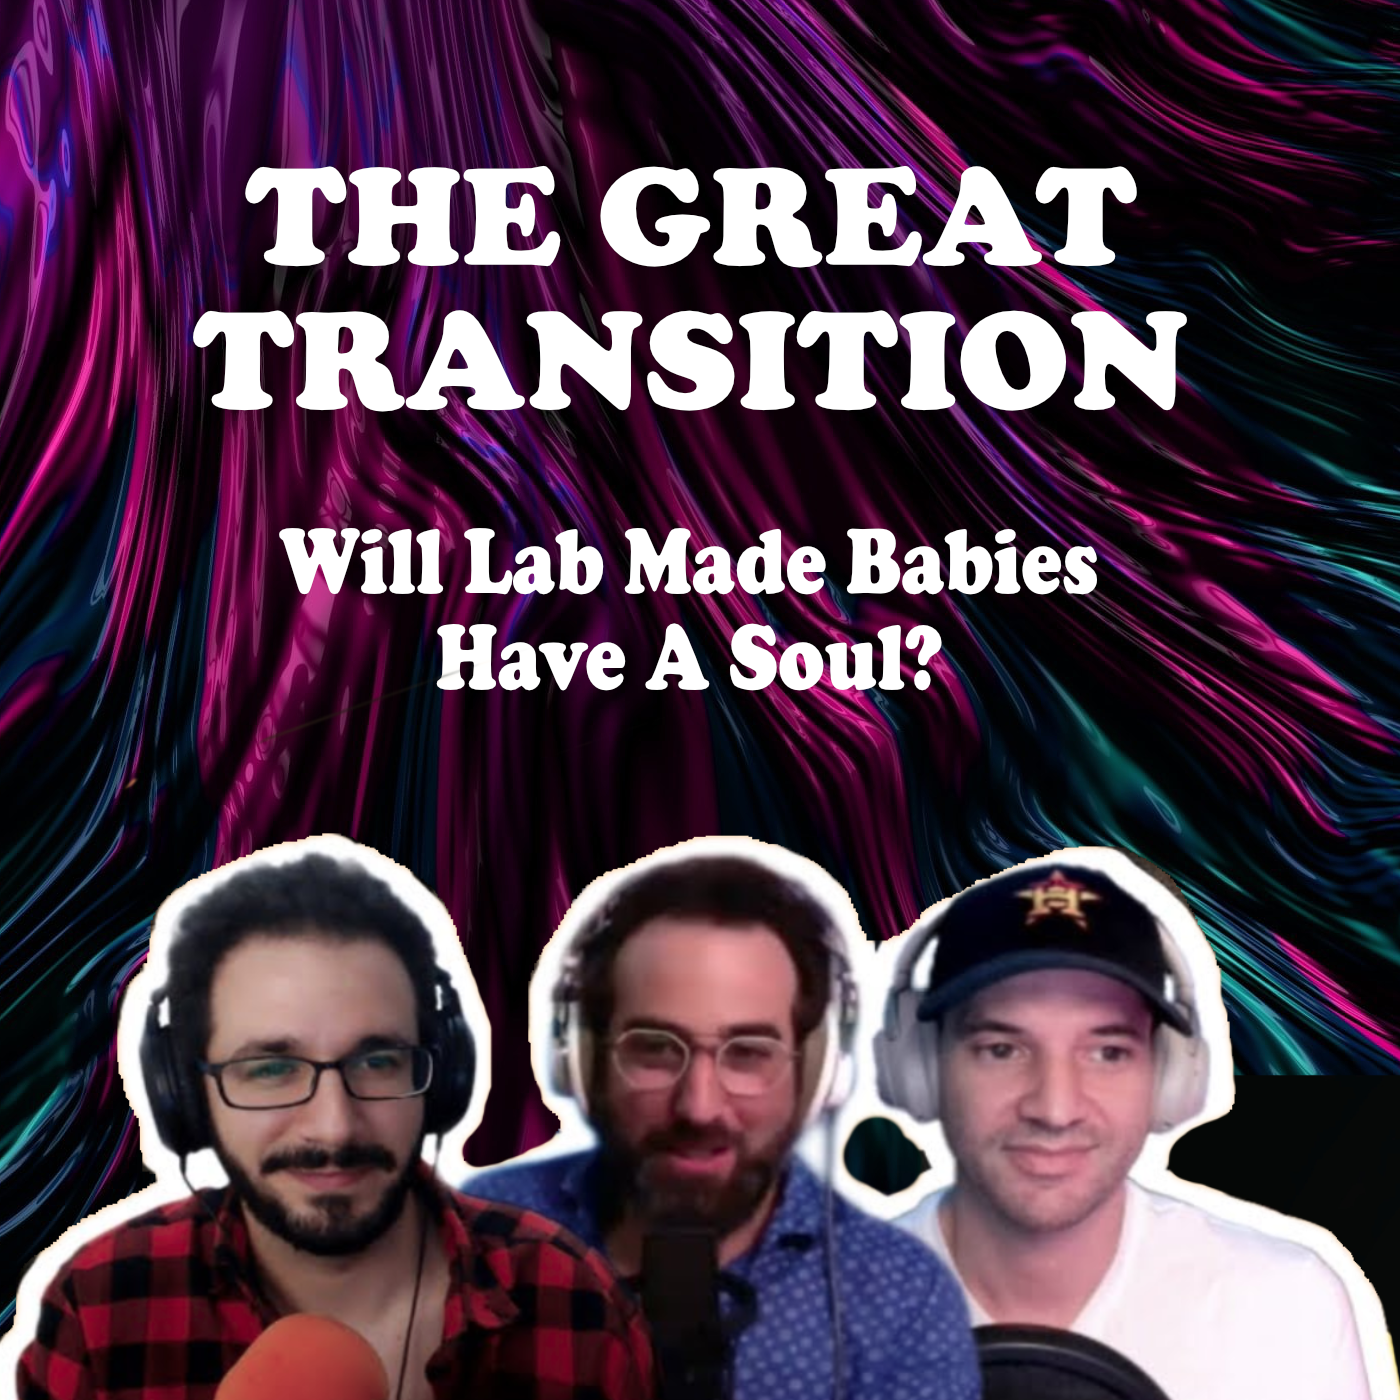 The Great Transition - Will Lab Made Babies Have A Soul?